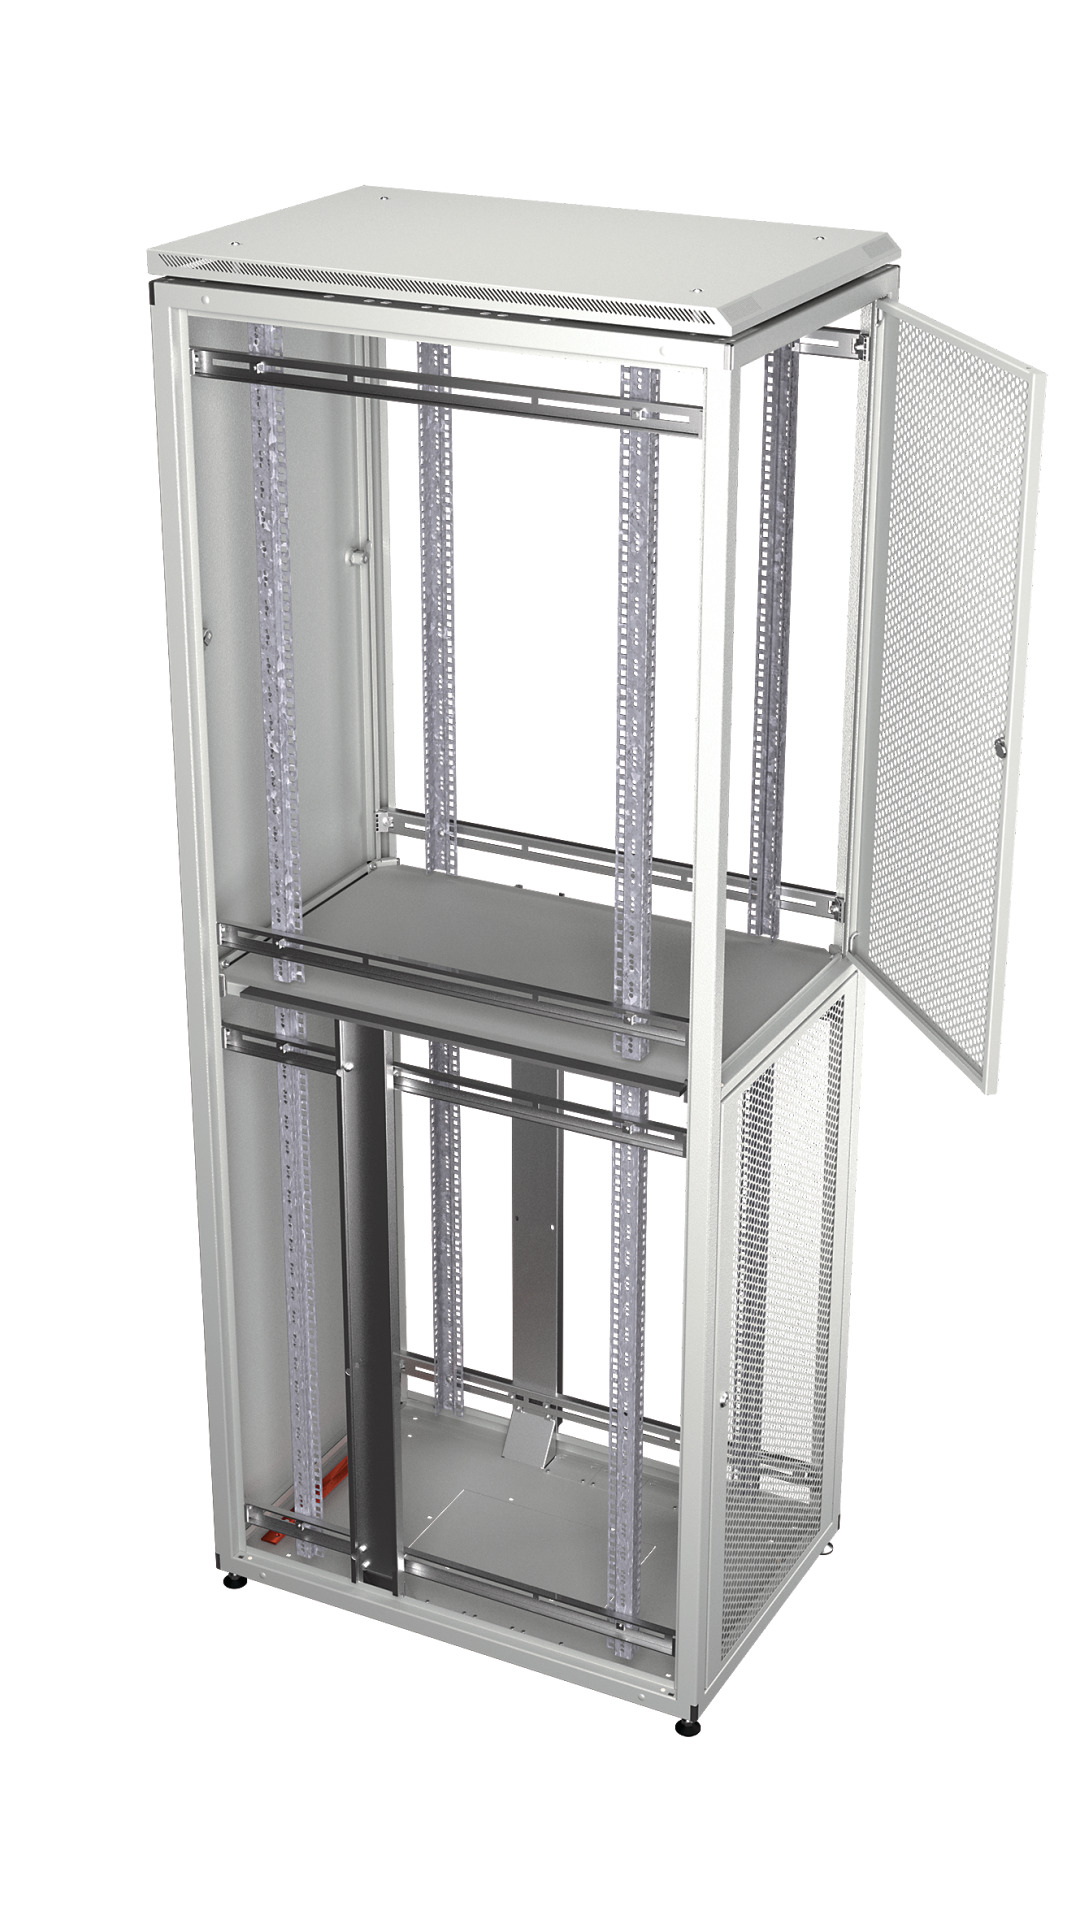 Co-Location Rack PRO, 1 x 42HE, 600x1000 mm, F+R 1-tlg. perforiert, RAL9005